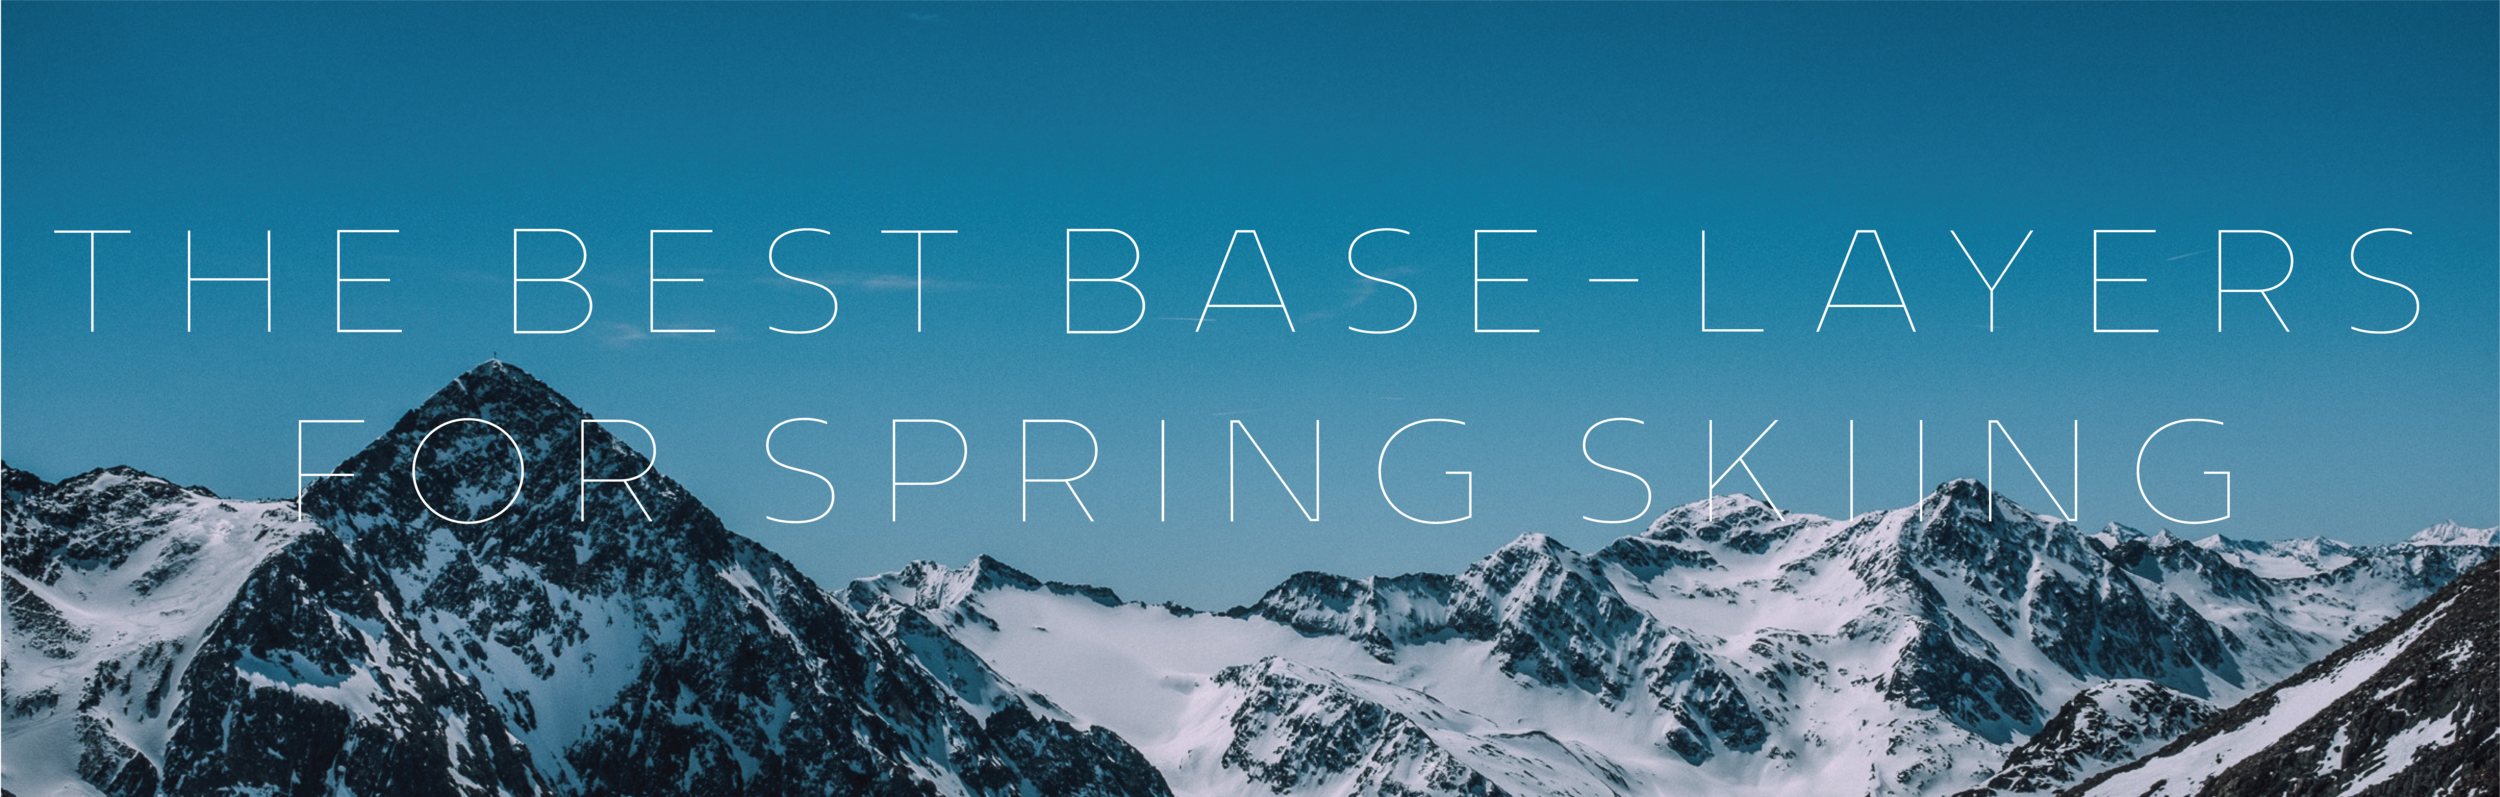 The best base-layers for spring skiing — H. Holderness